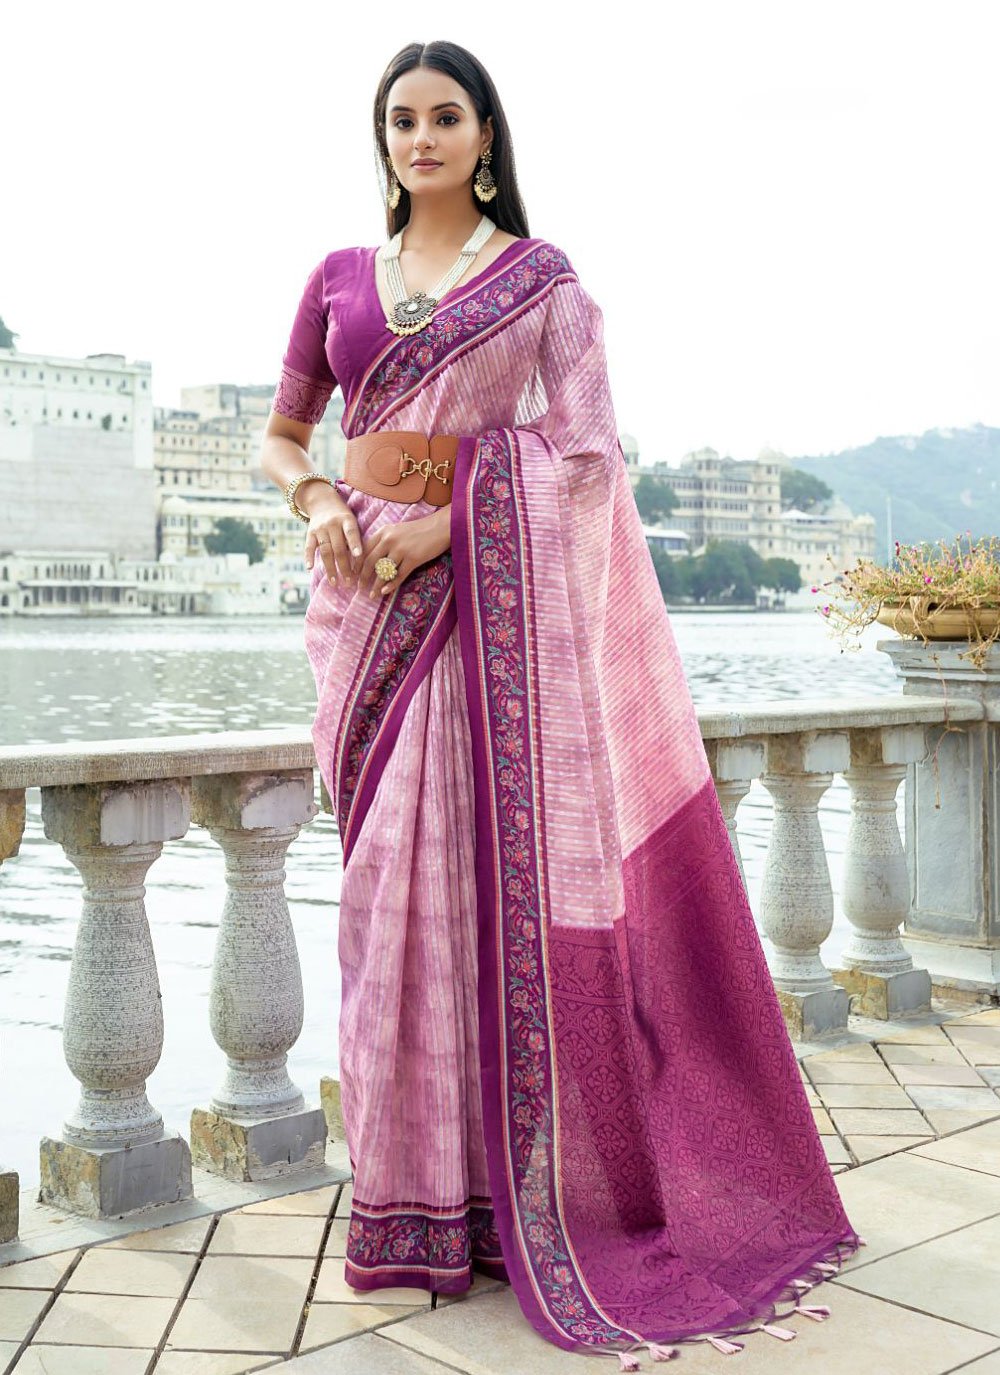 Pink Cotton Saree With Woven Border And Blouse - CHARUPAMA - 3578925